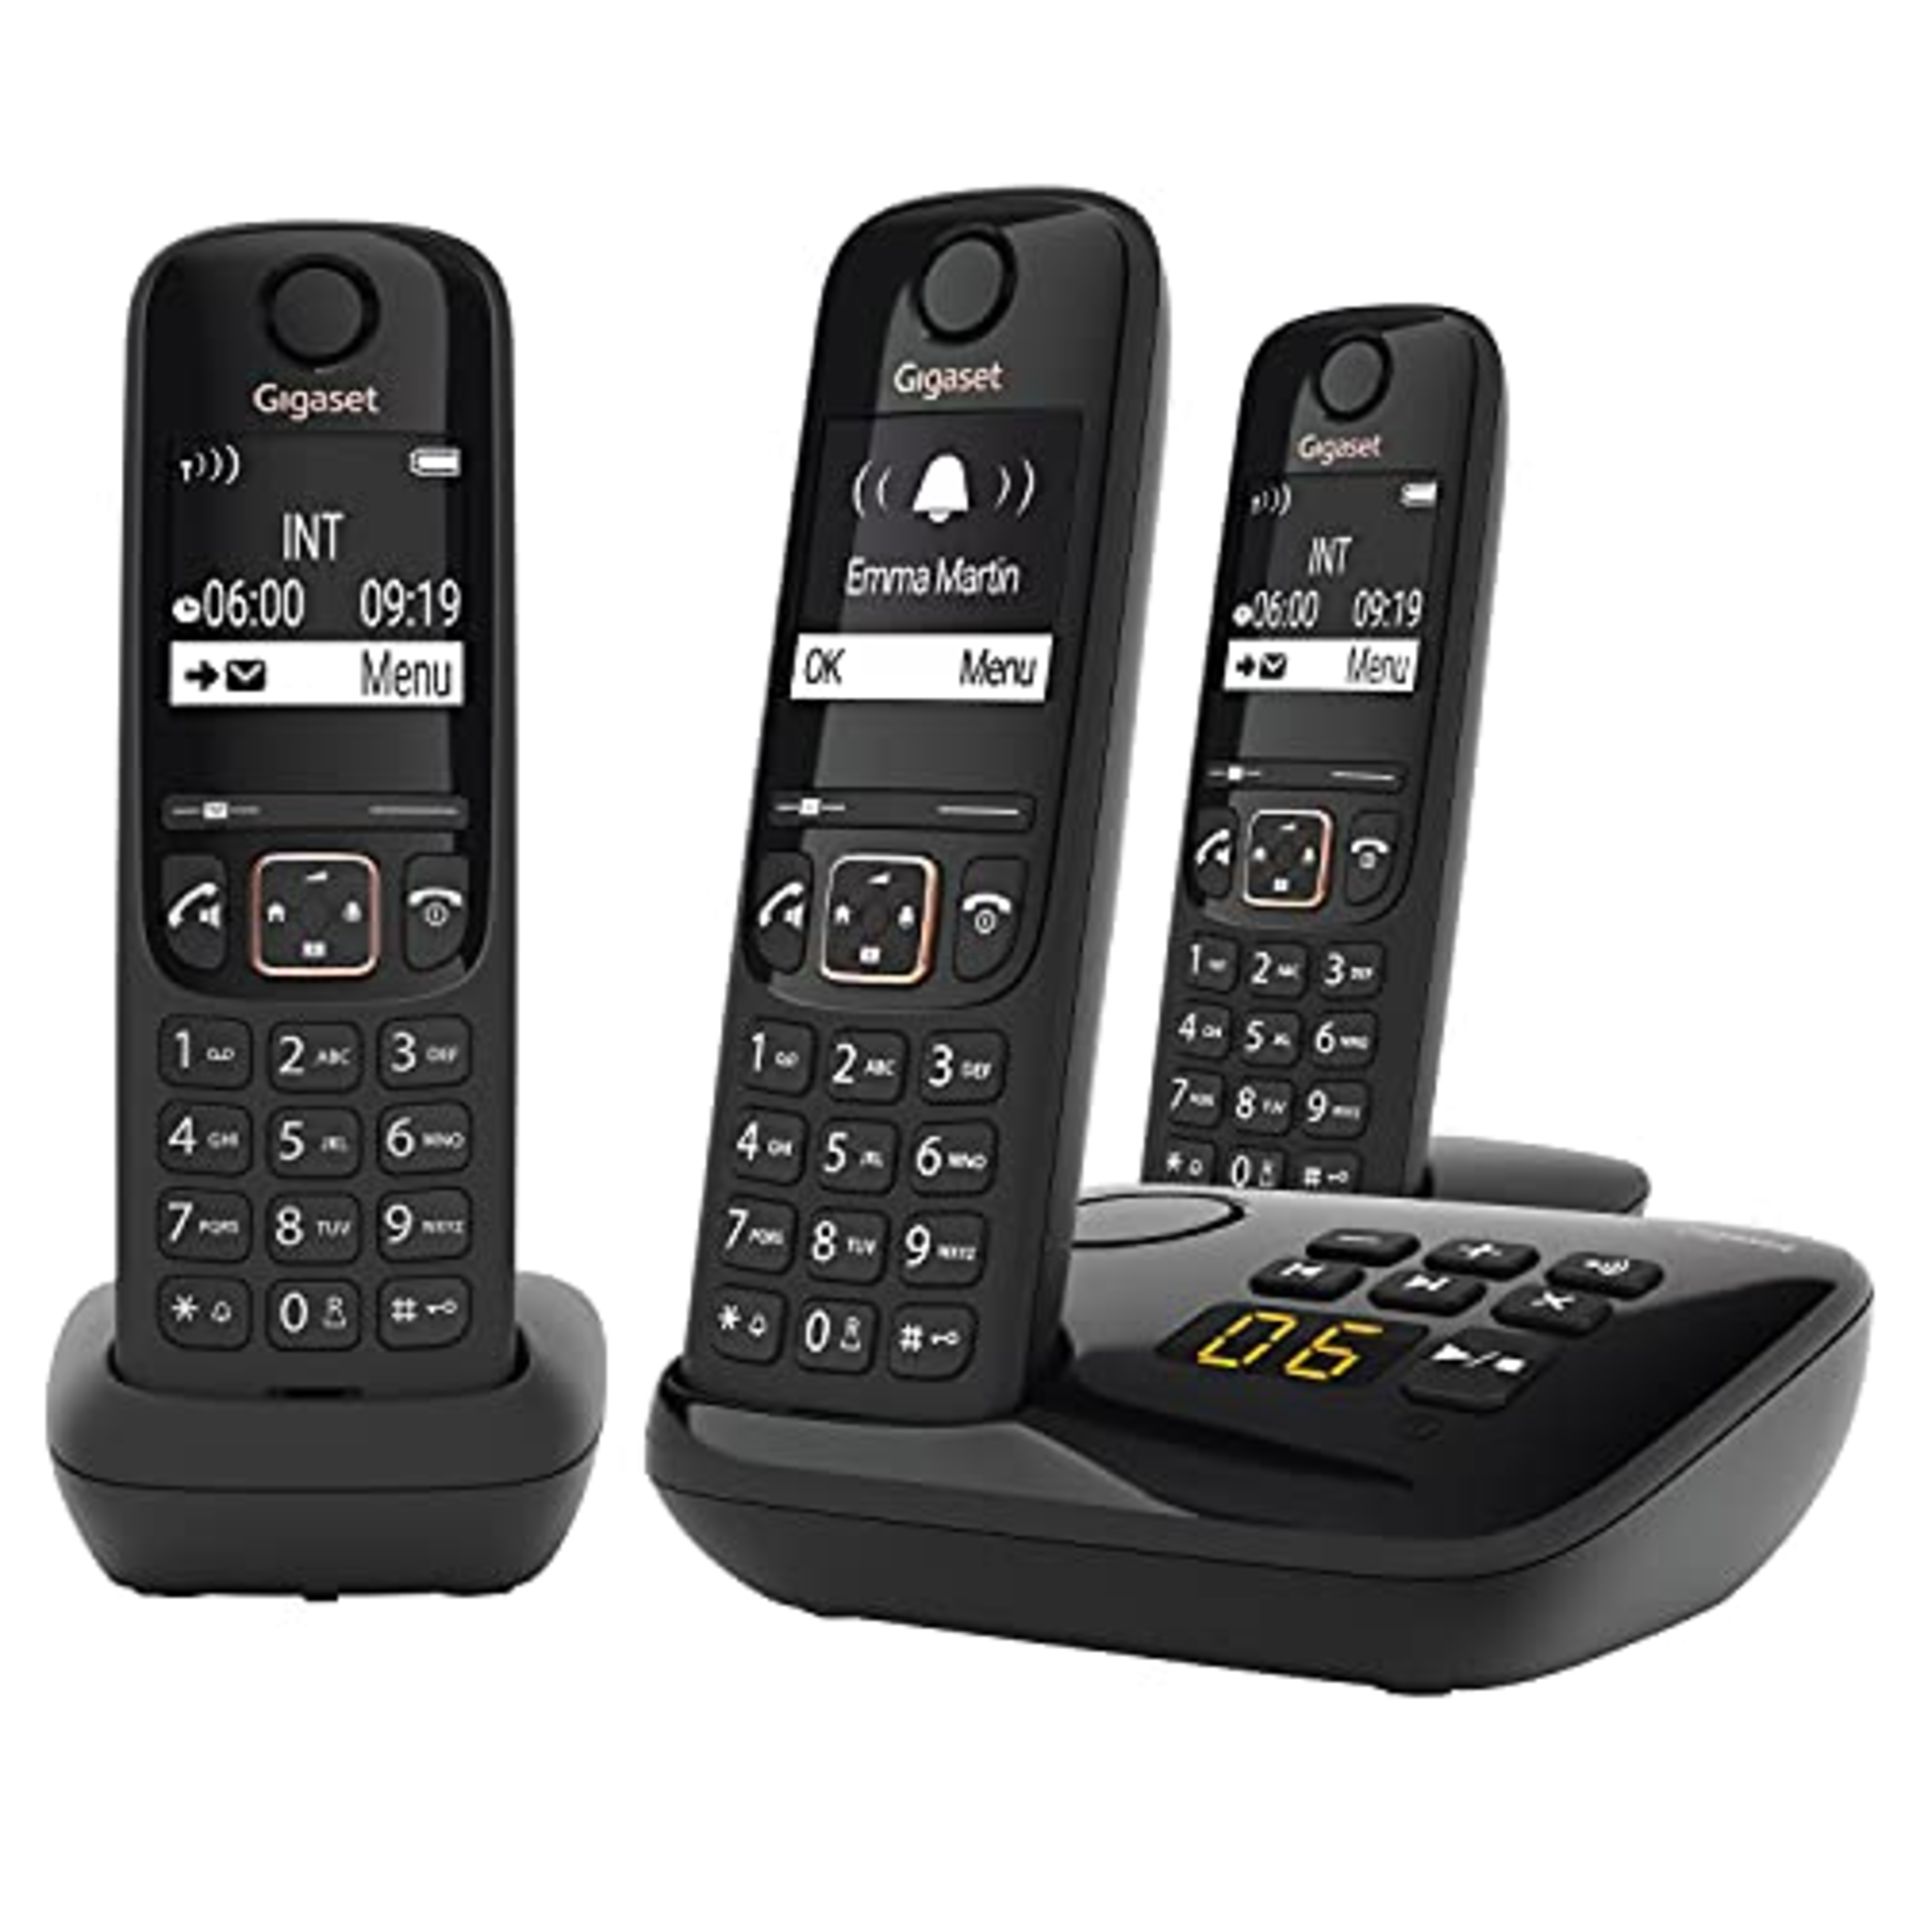 Gigaset AS690 - Cordless DECT Telephone - large, high-contrast display - brilliant aud - Image 4 of 6